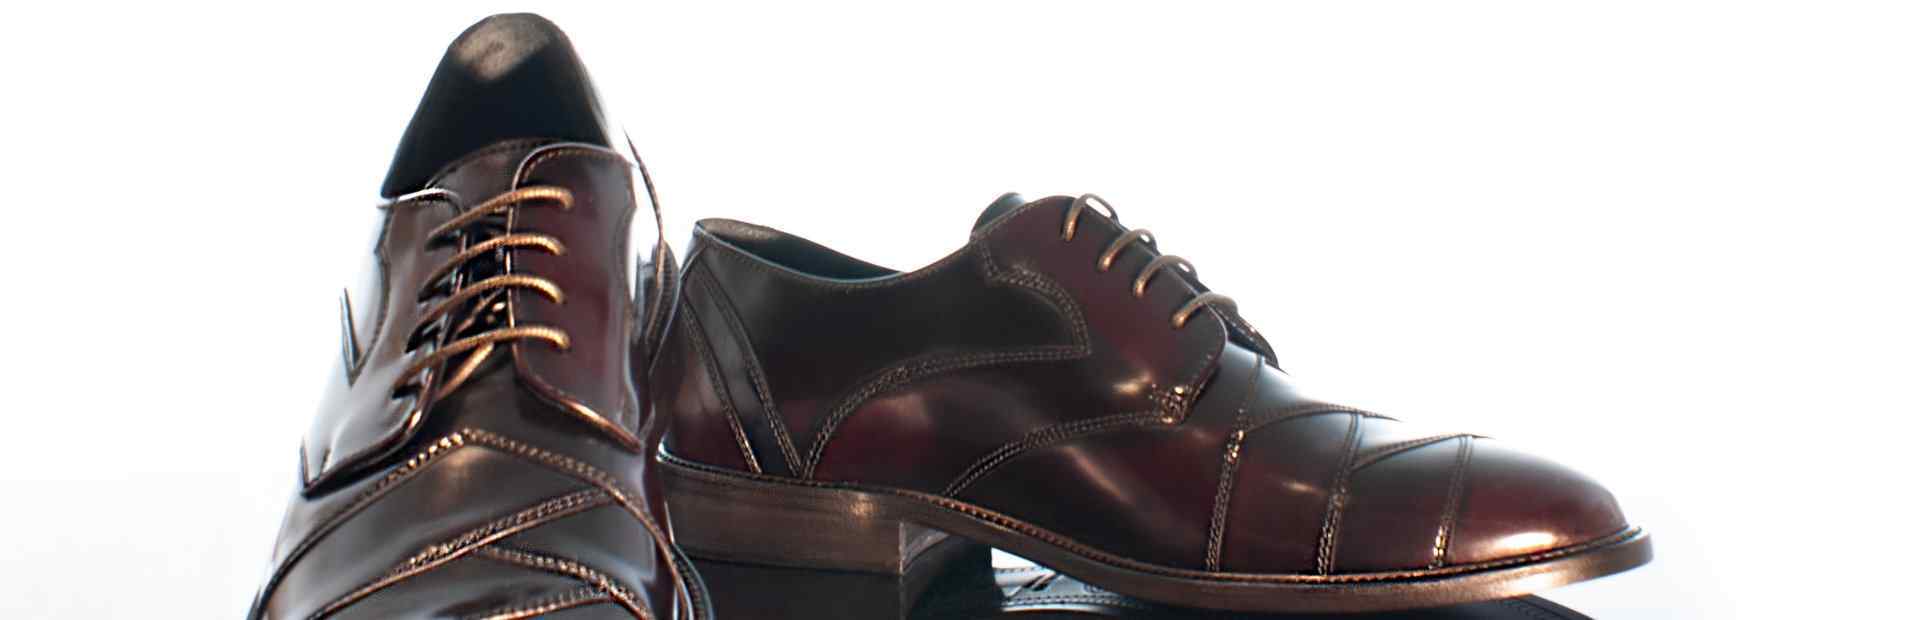 A pair of Solatio Shoes